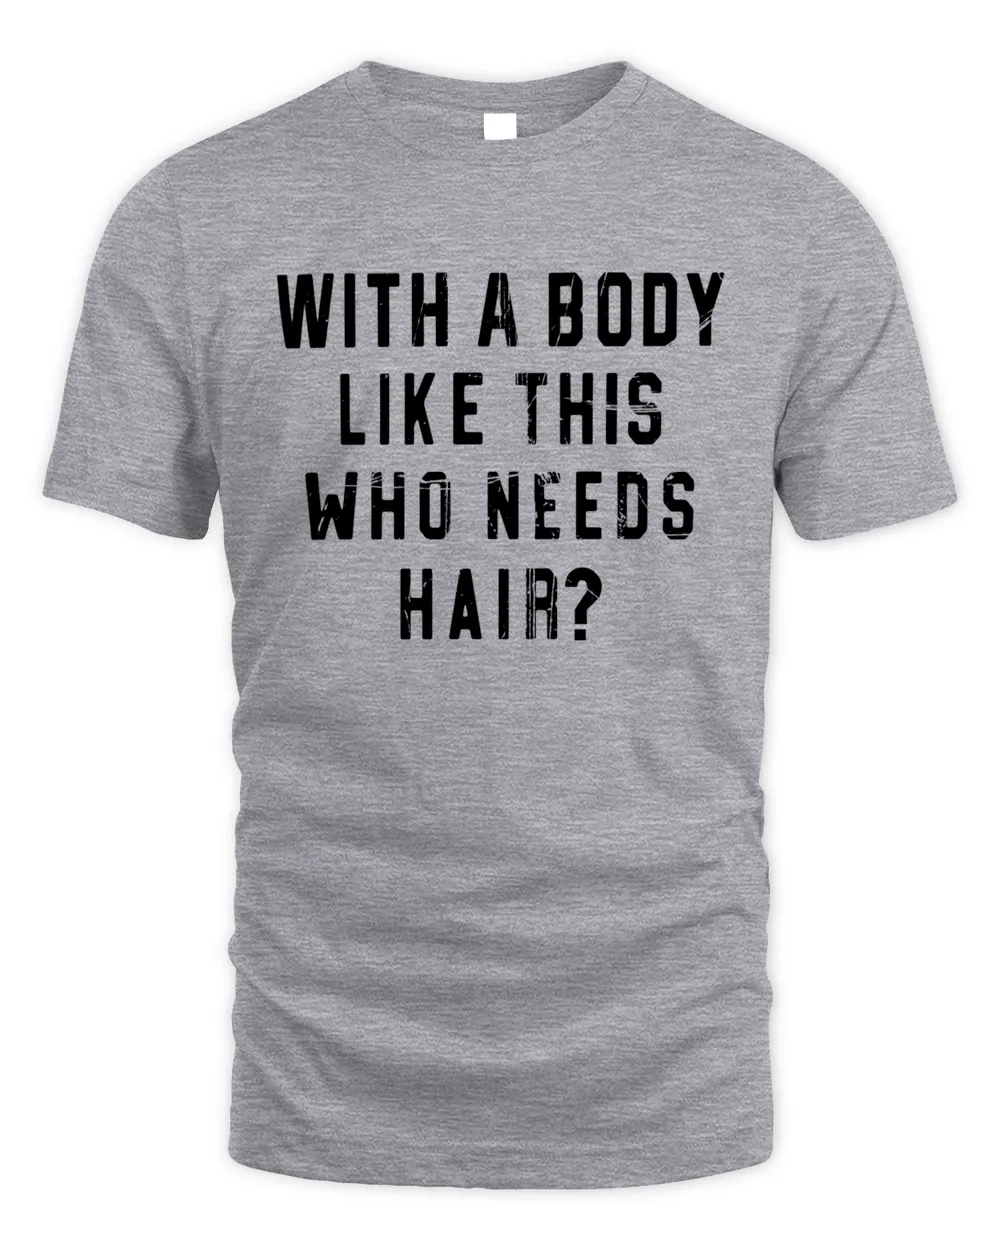 With a Body Like This Who Needs Hair Tshirt, Funny Shirt for Men, Fathers Day Gift, Husband Gift